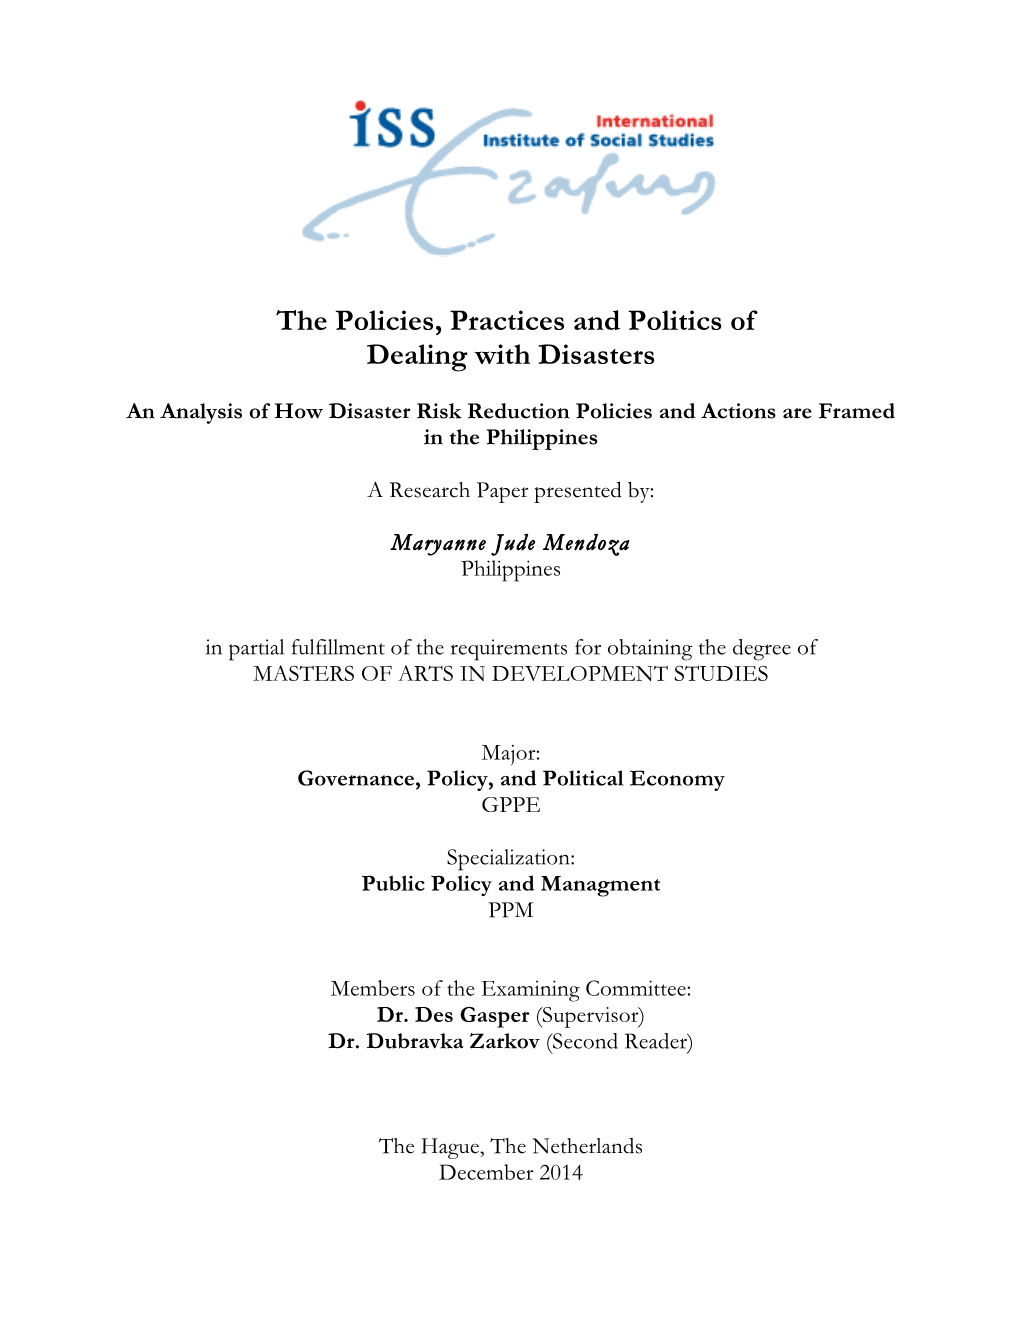 The Policies, Practices and Politics of Dealing with Disasters